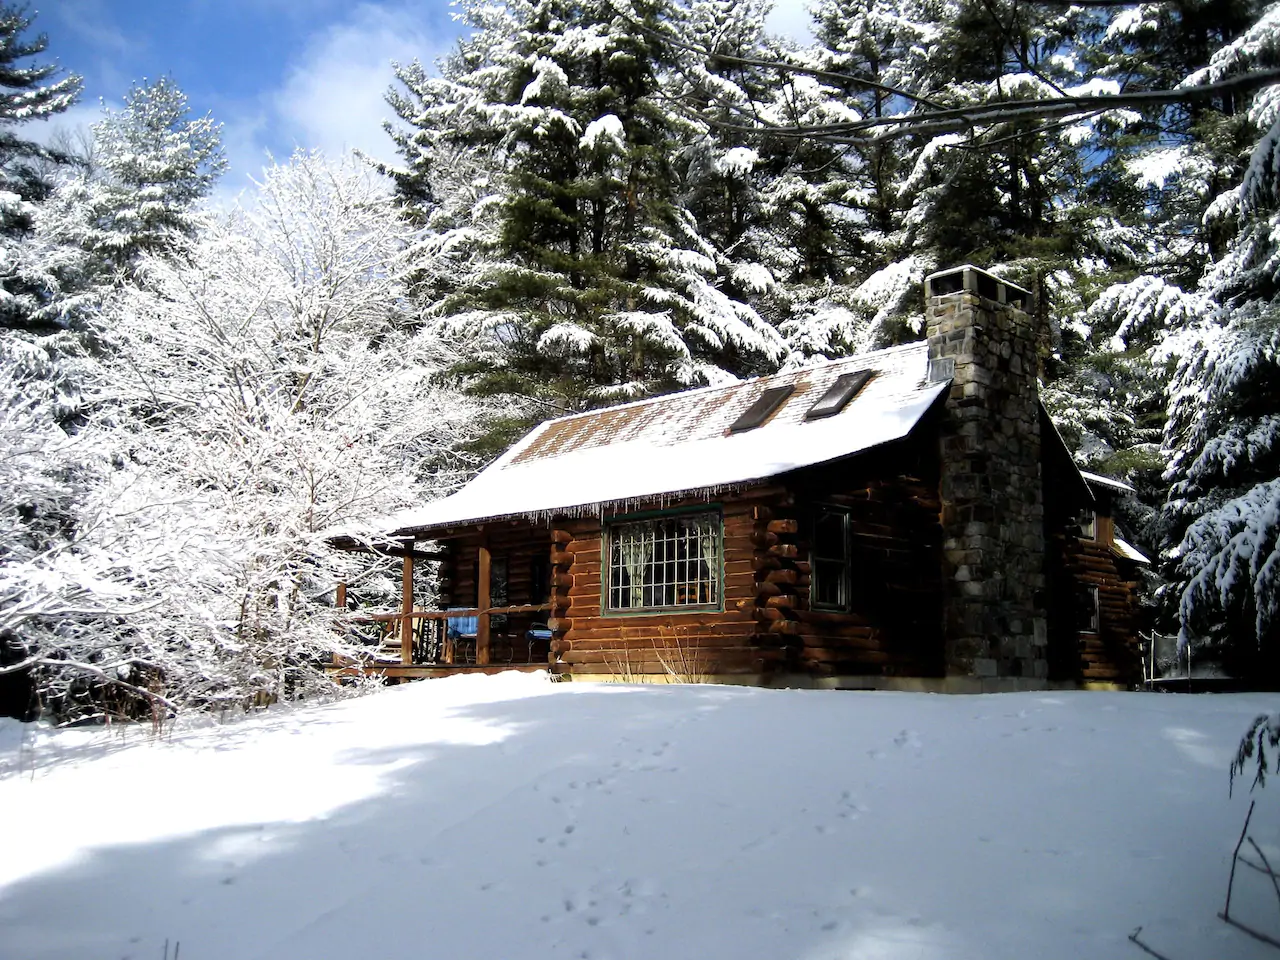 Cottage in the woods in the snow